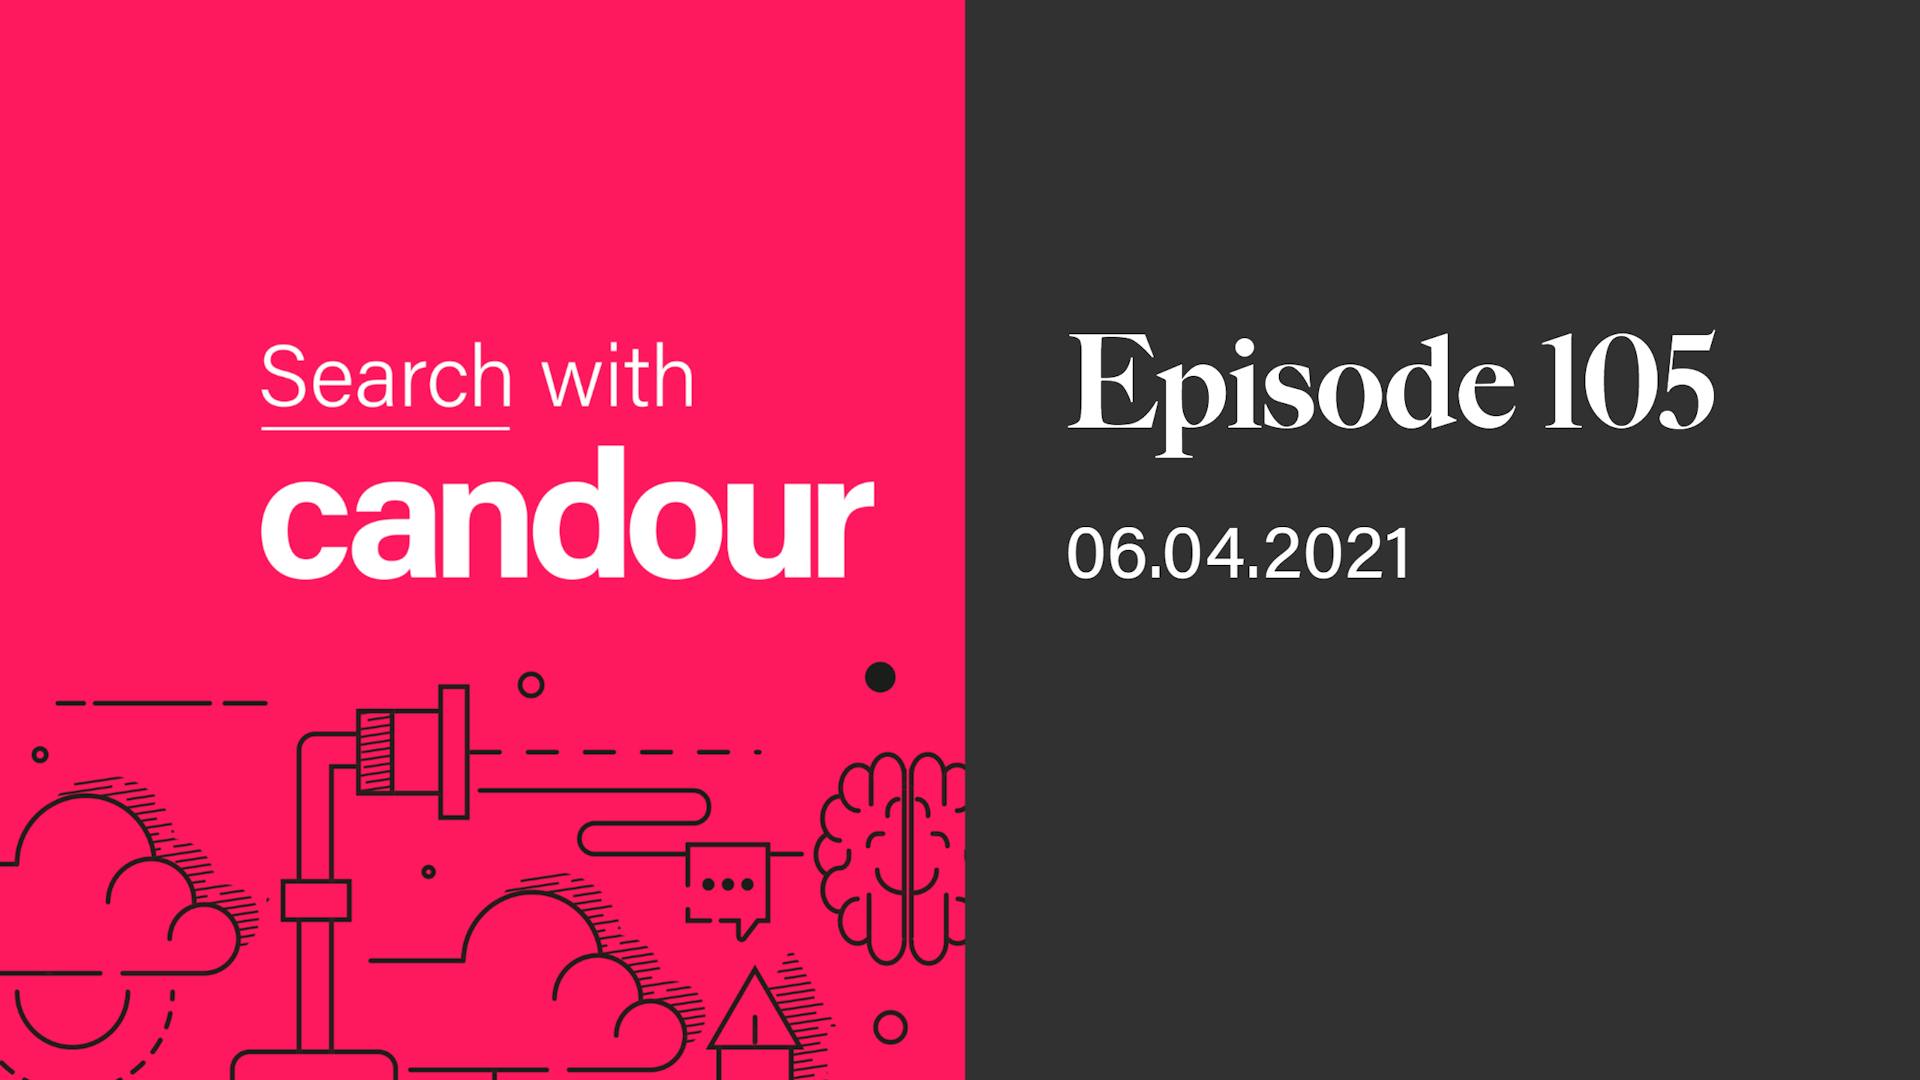 Episode 105 - Search with Candour